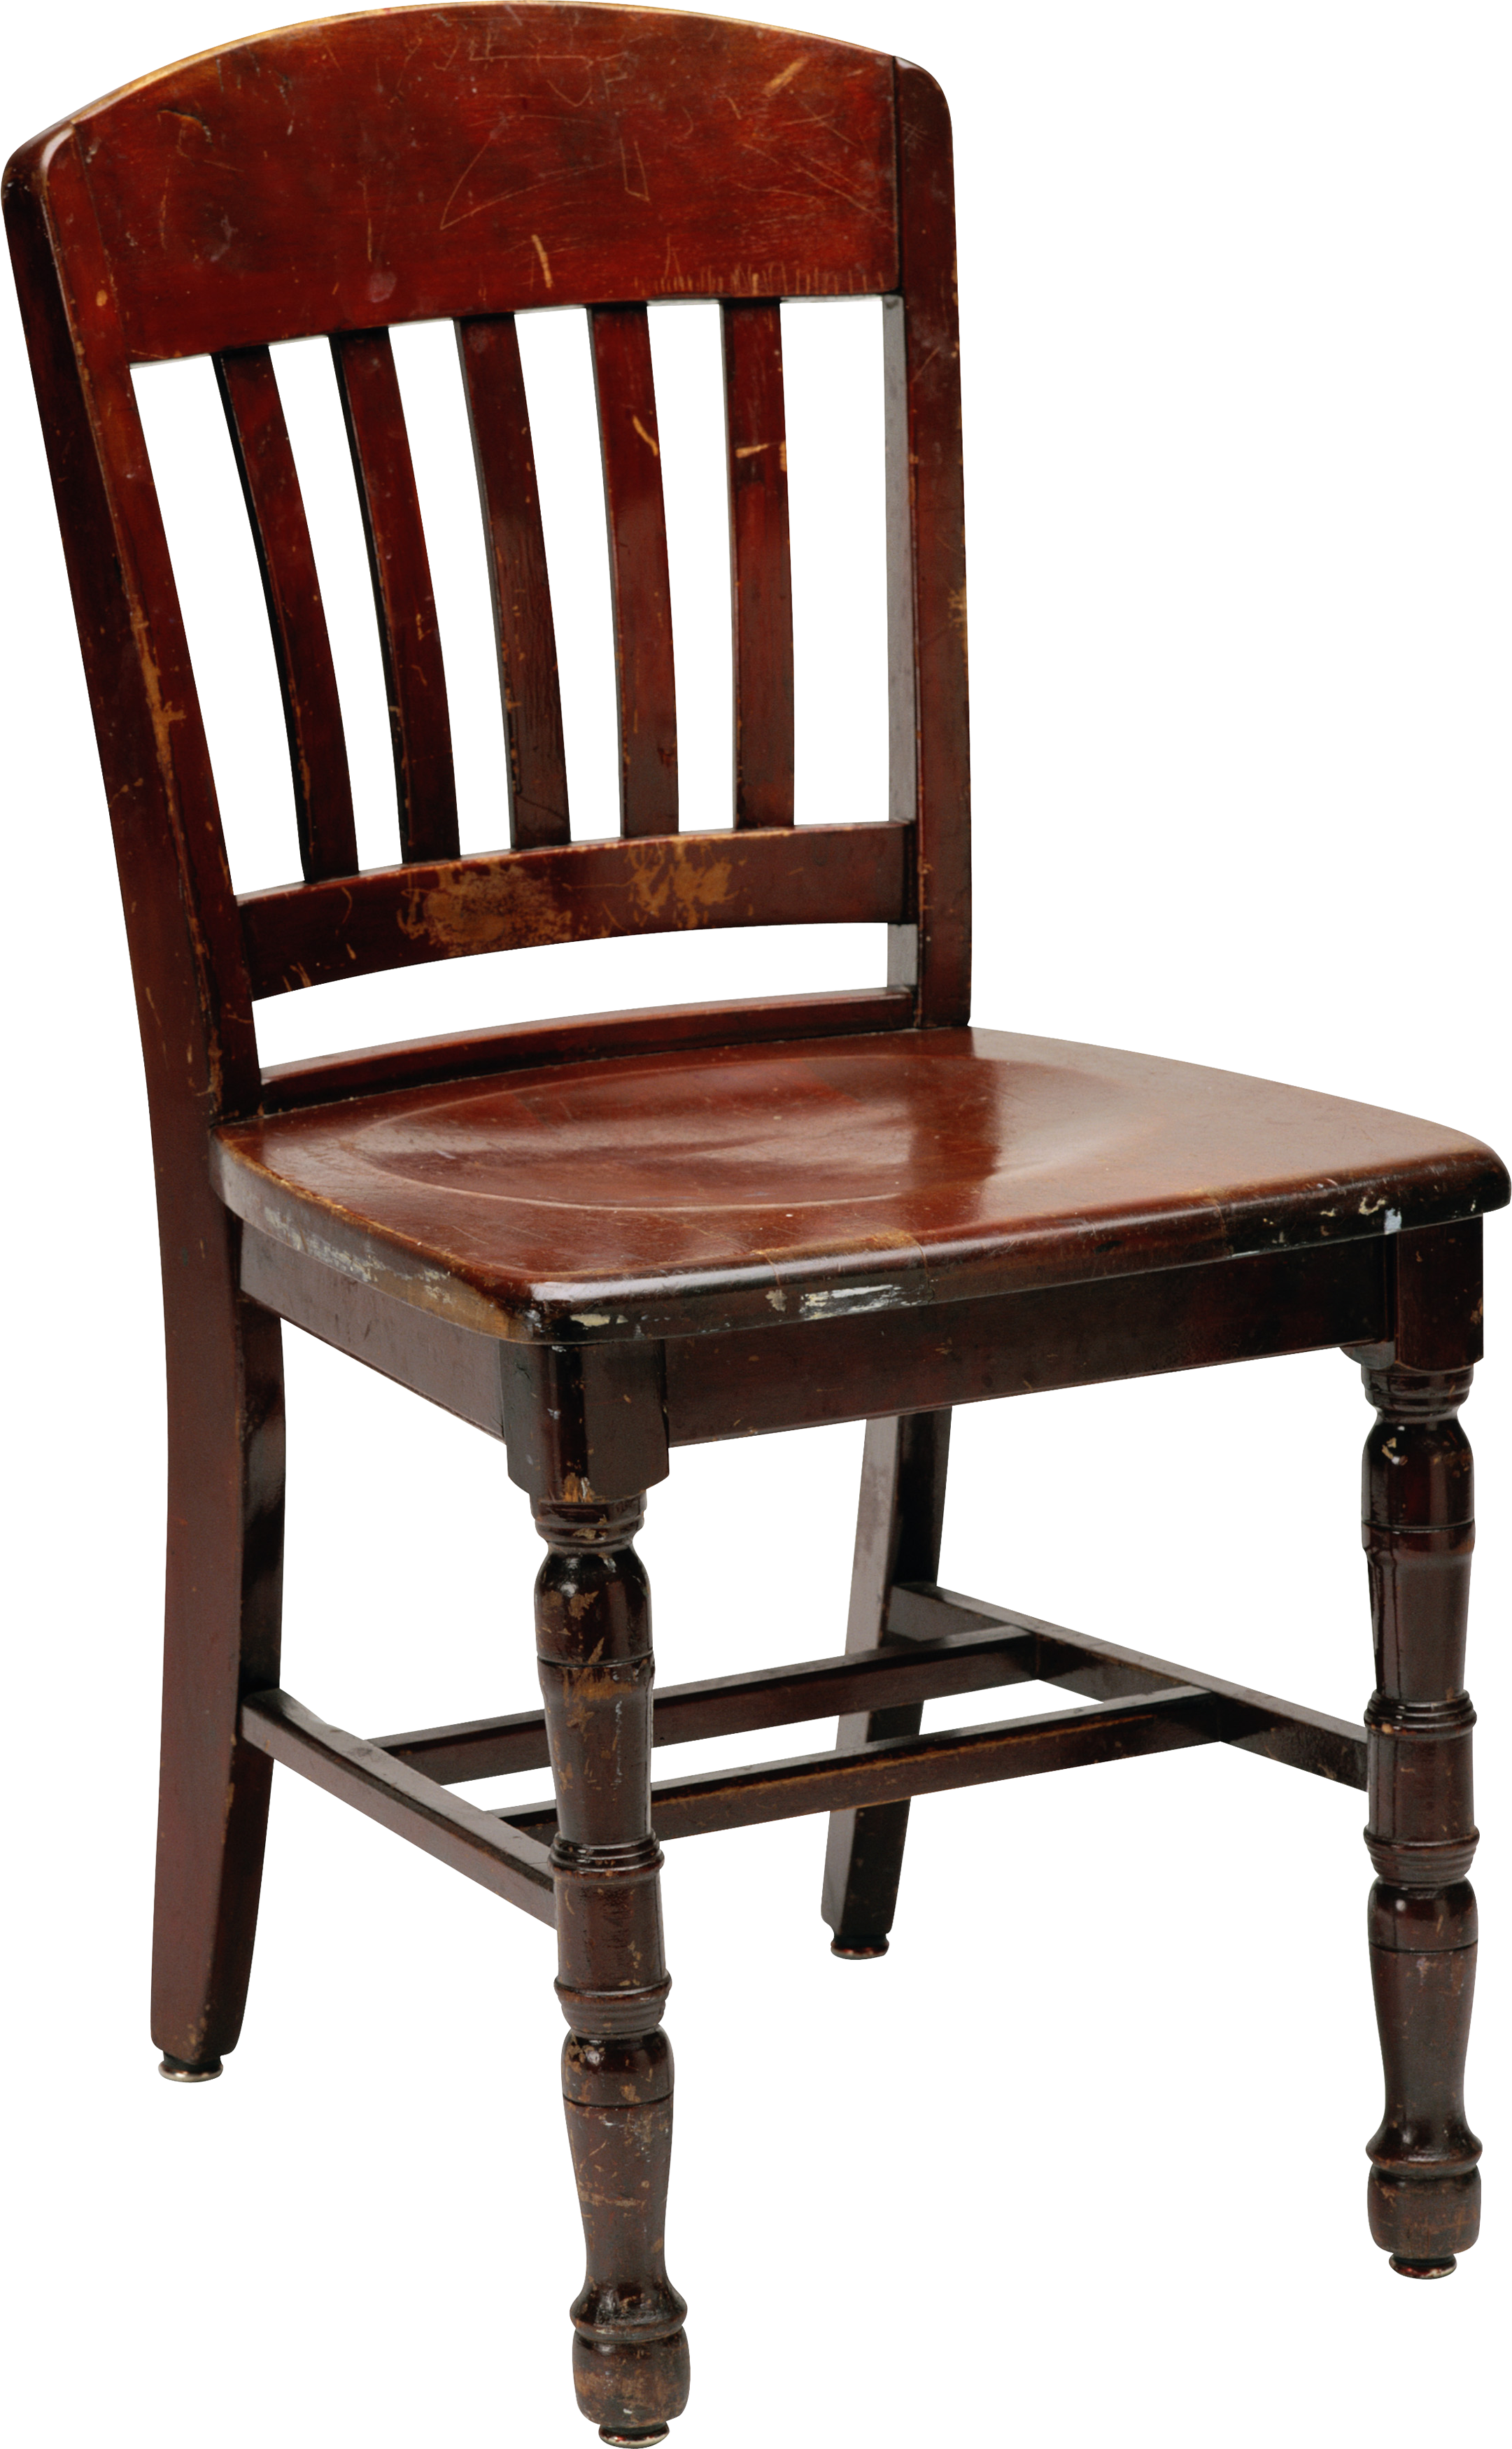 Chair PNG in Transparent pngteam.com